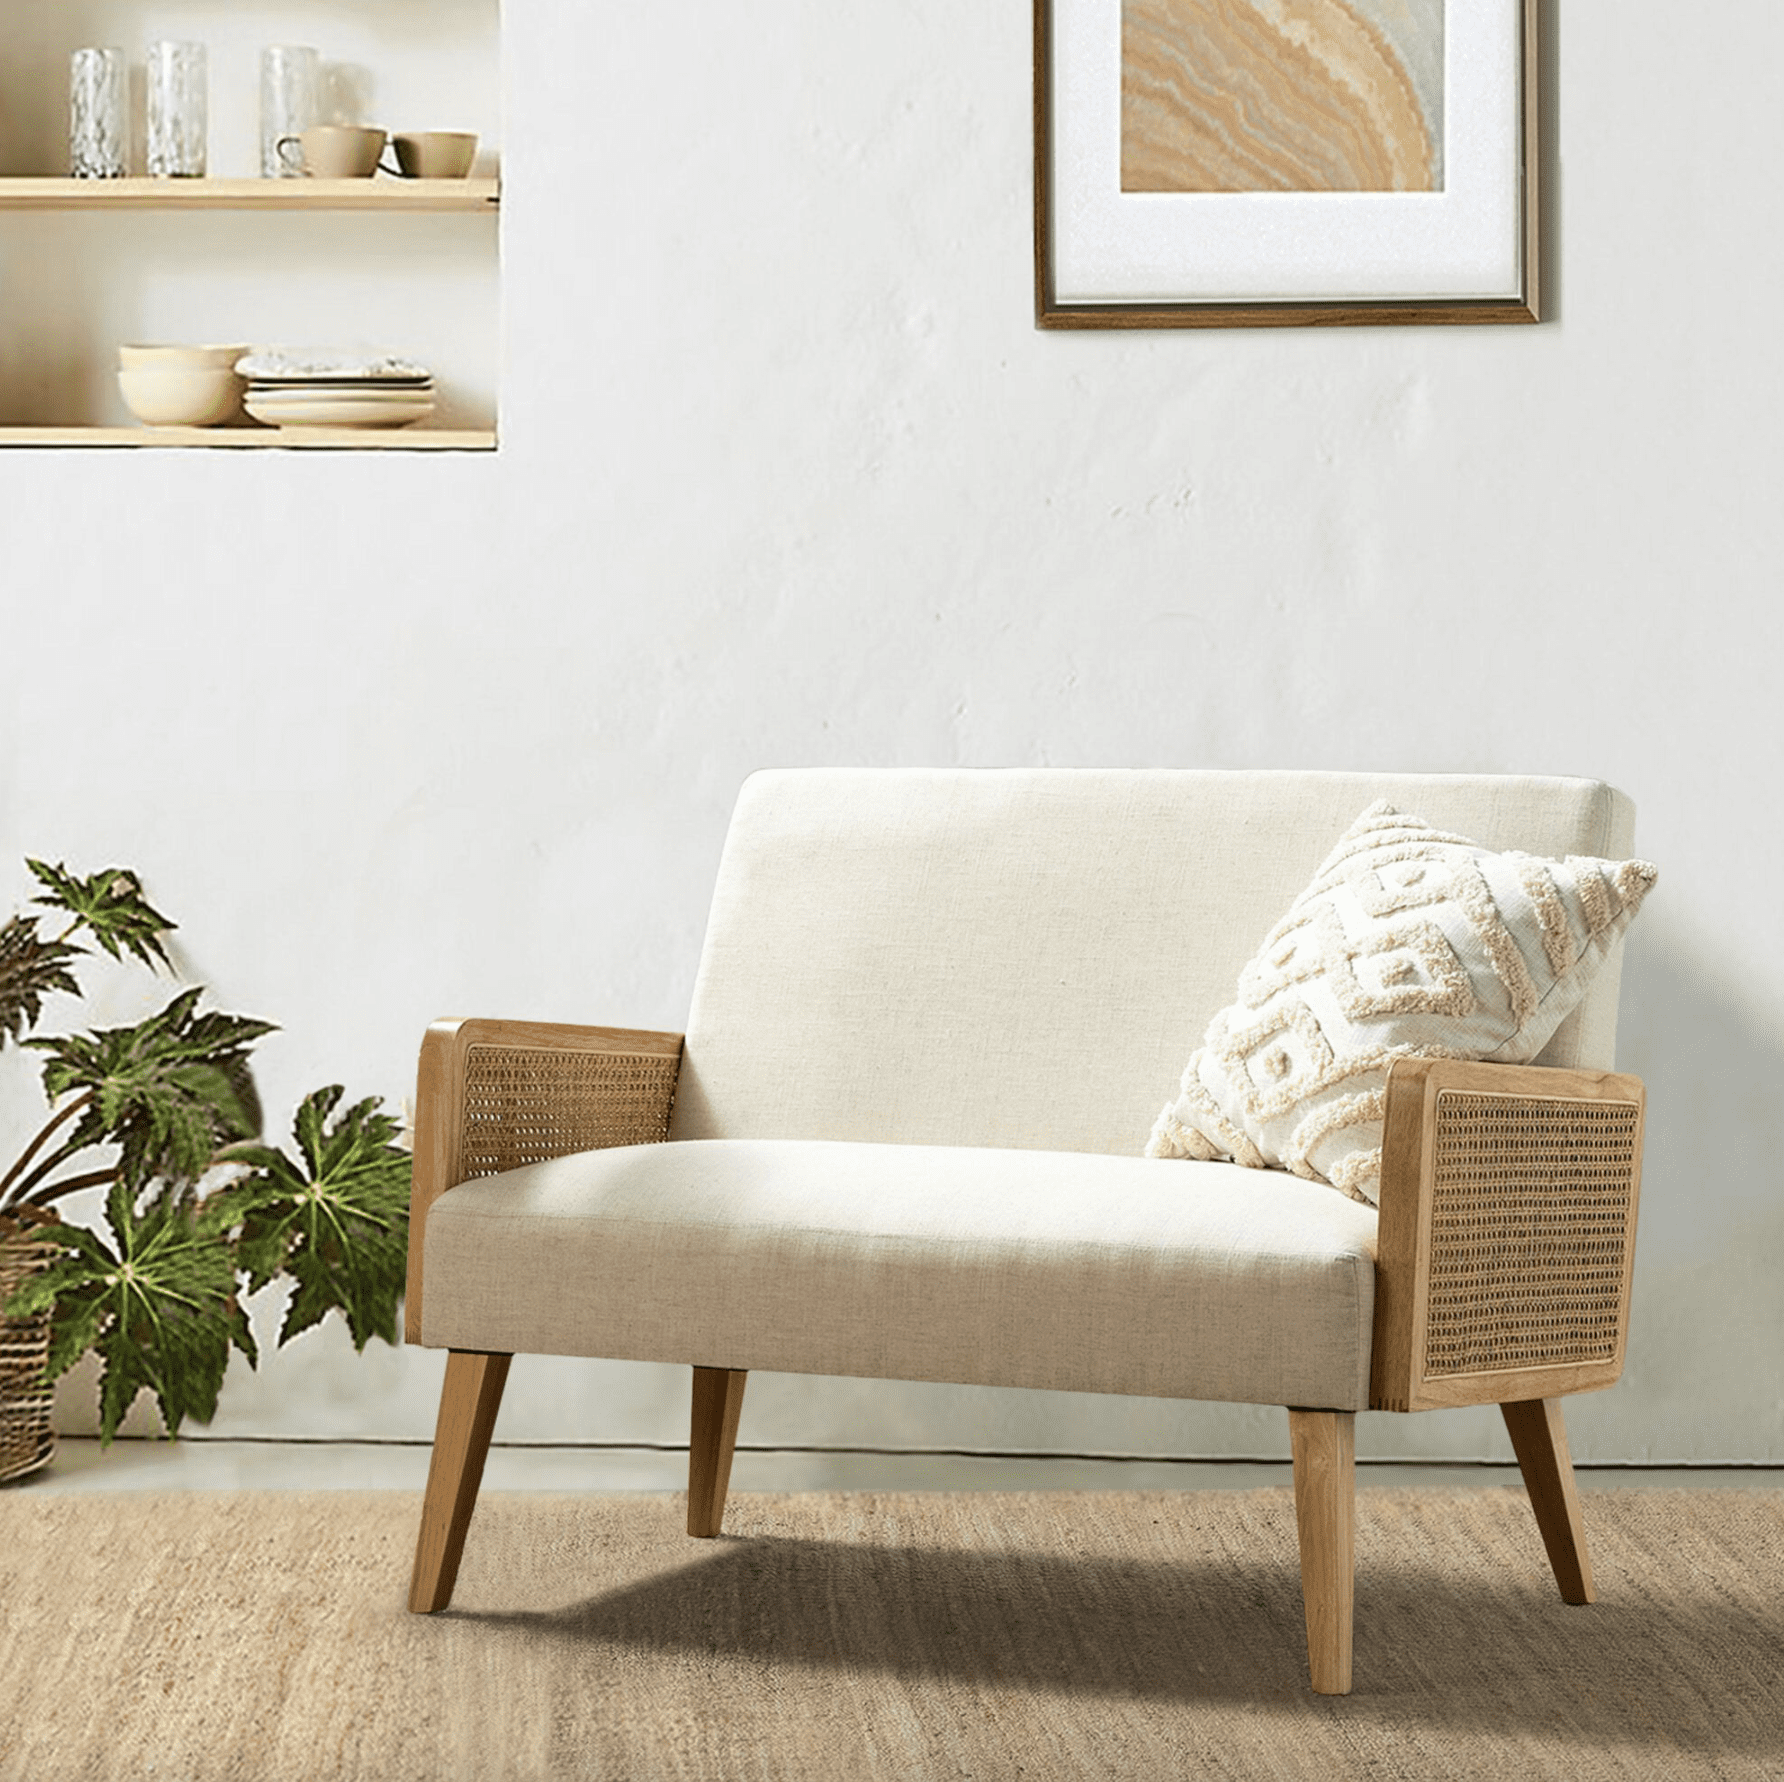 Where can I buy affordable but decent furniture in San Francisco